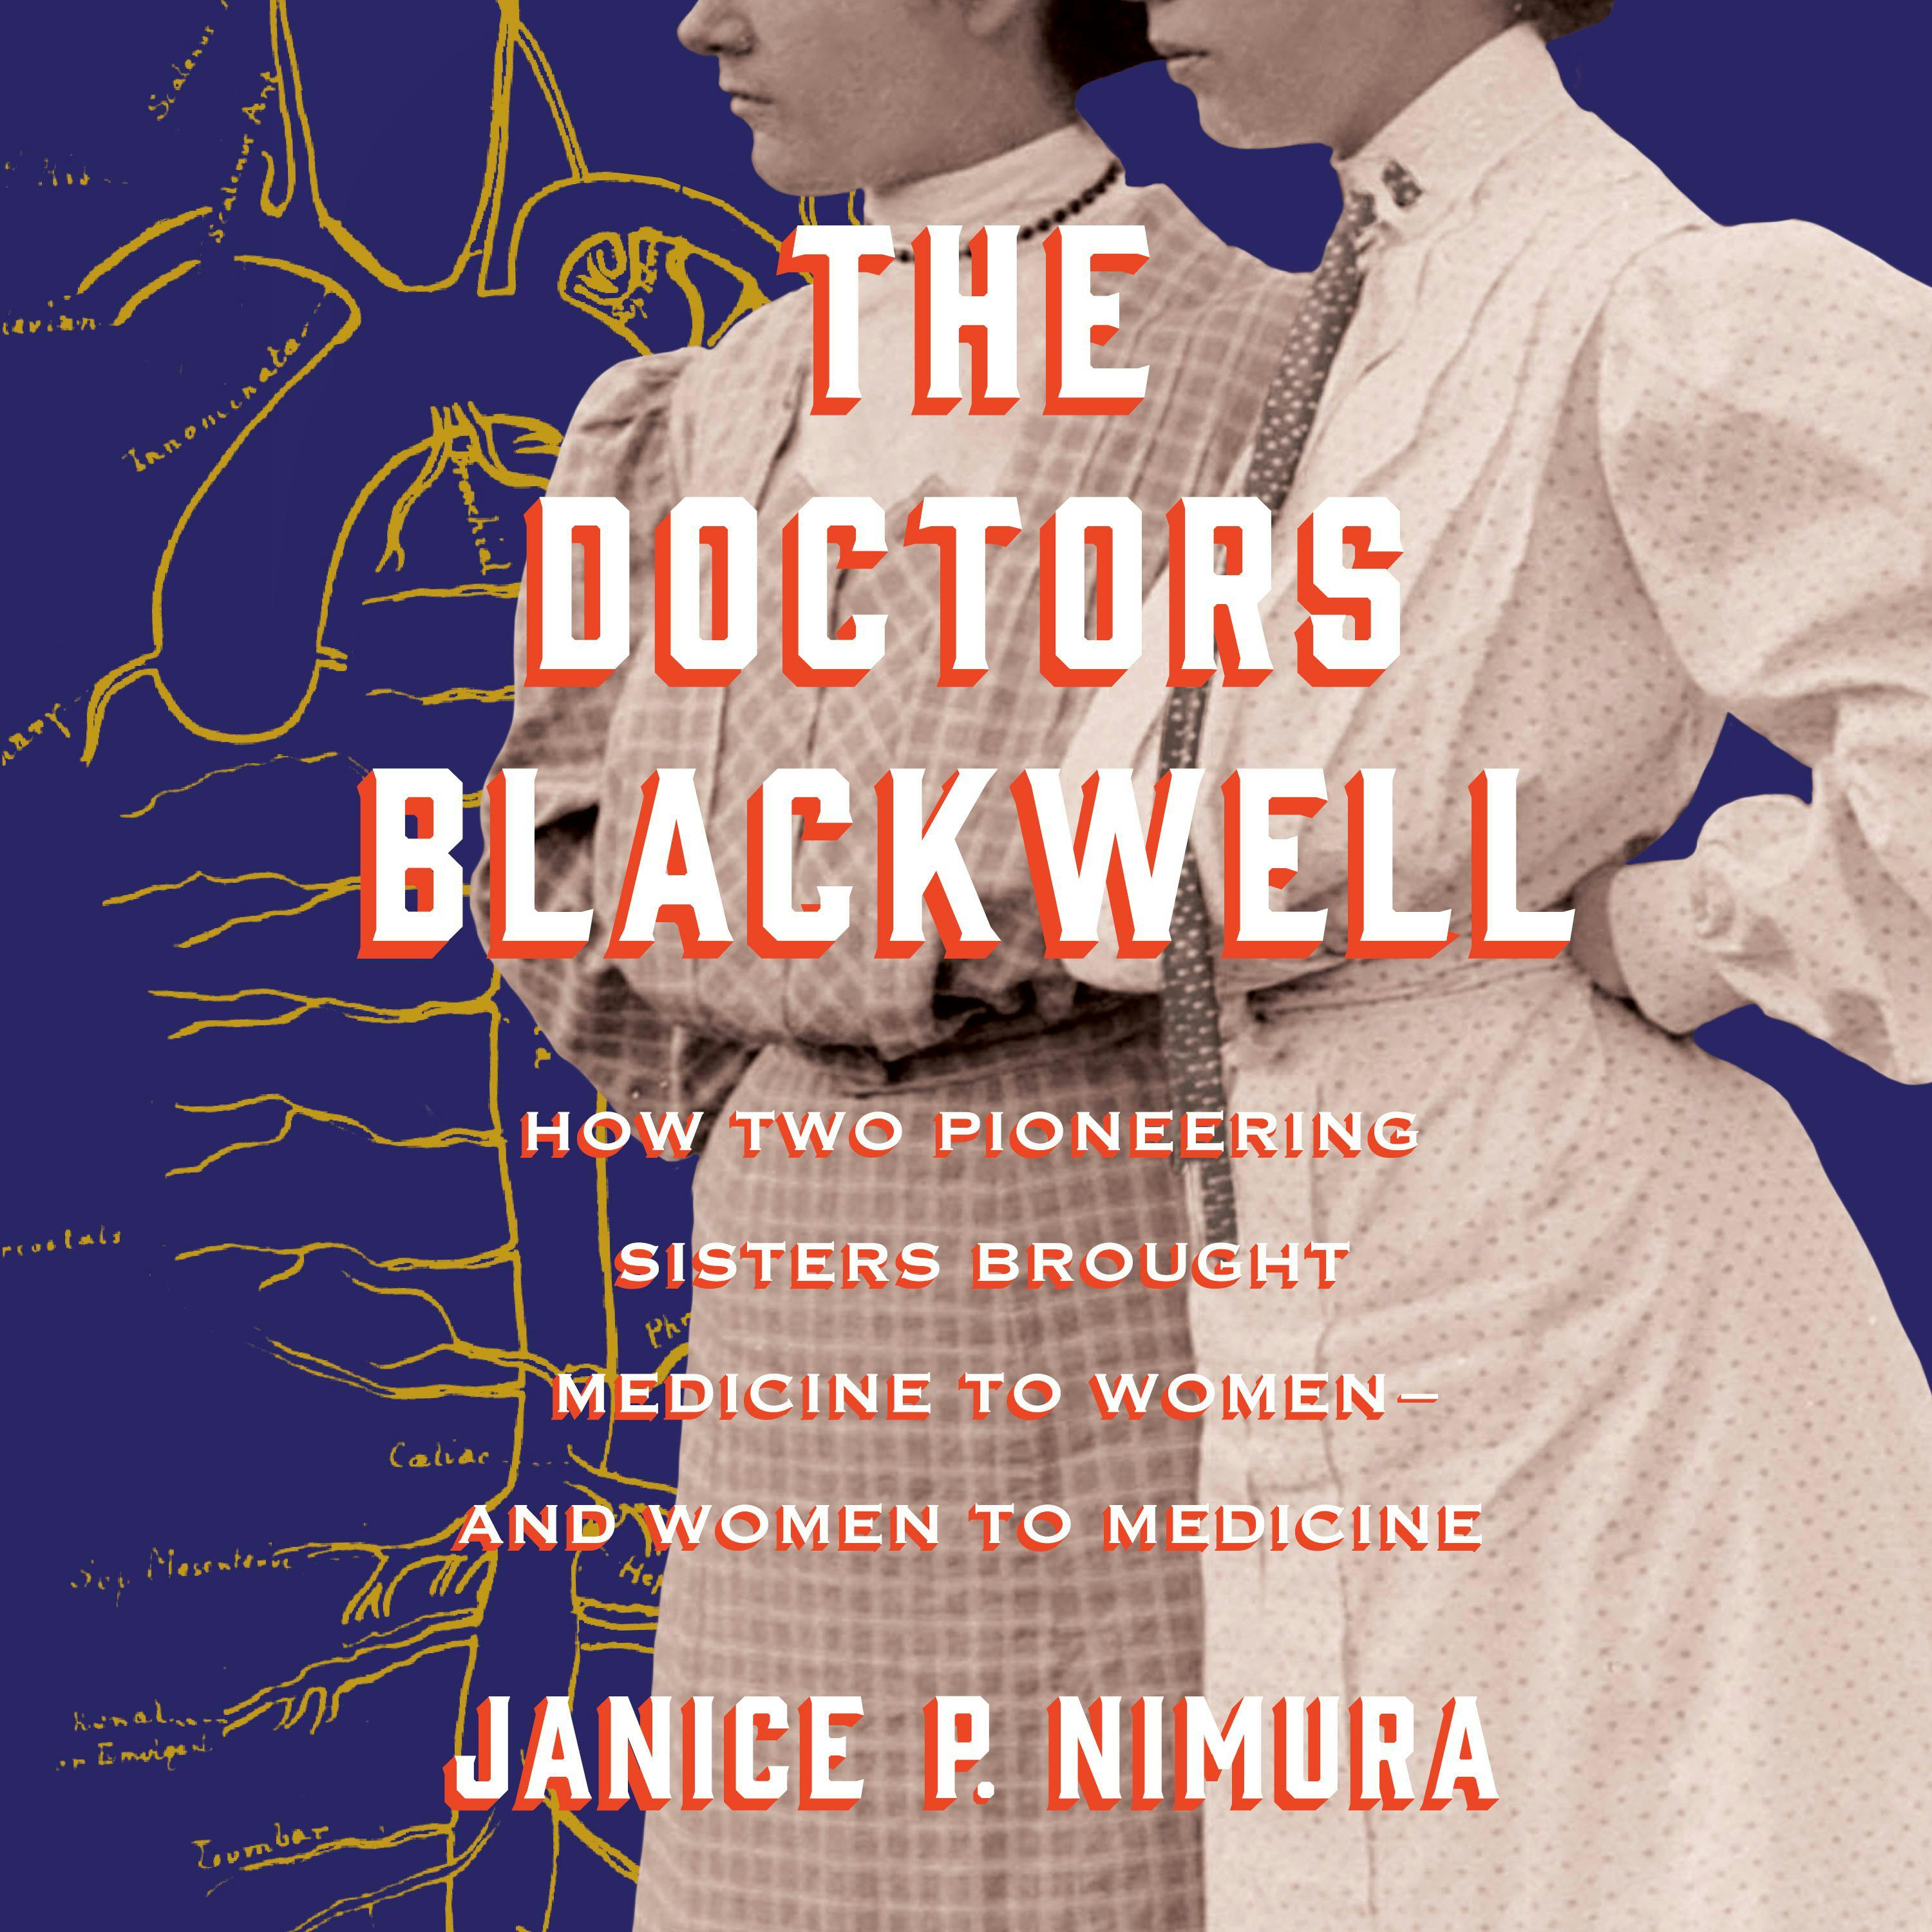 The Doctors Blackwell: How Two Pioneering Sisters Brought Medicine to Women and Women to Medicine - Janice P. Nimura